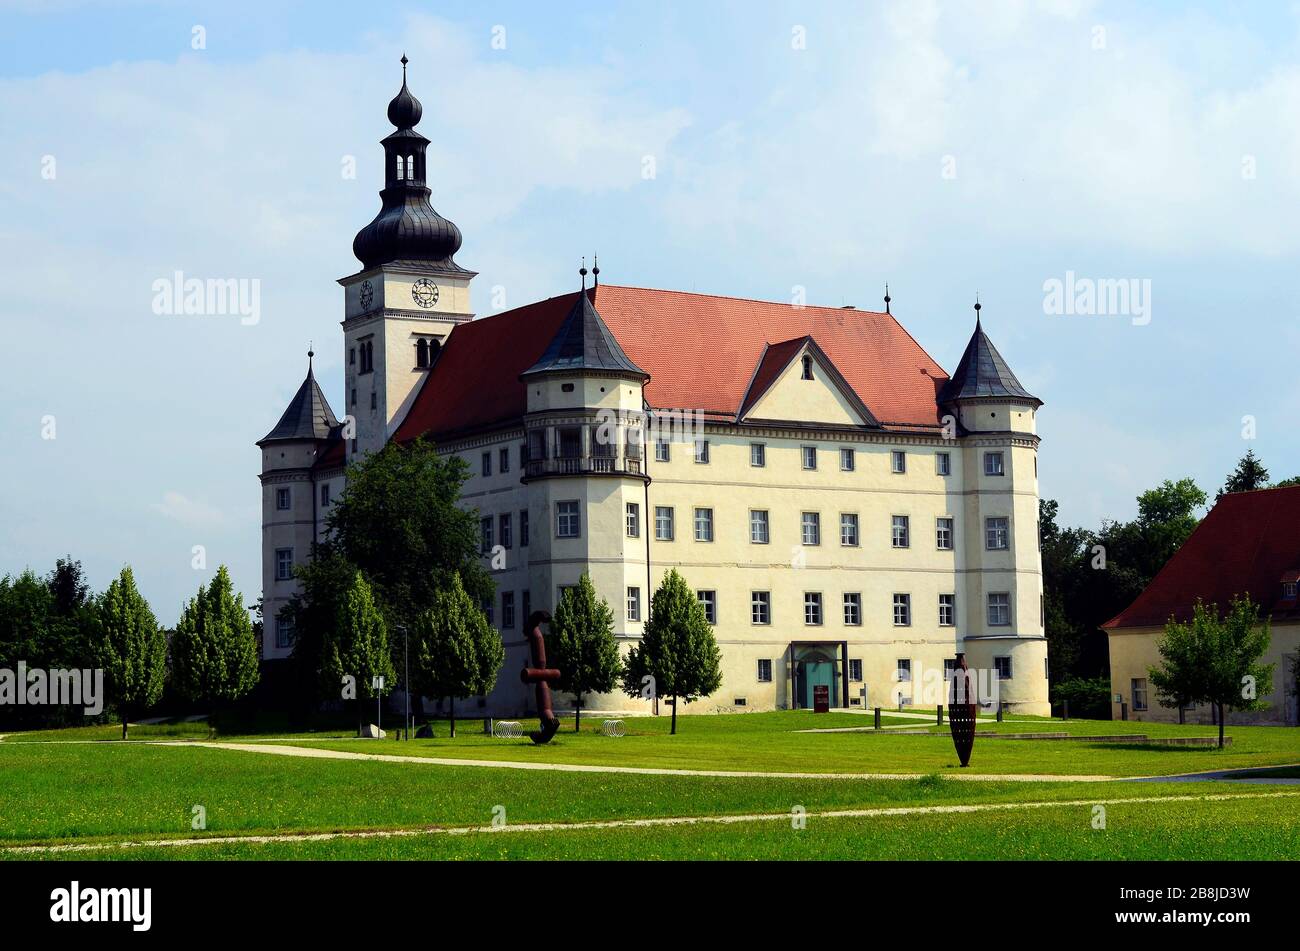 Alkoven, Austria - July 06, 2013: Renaissance castle Hartheim, it became notorious as one of the Nazi Euthanasia killing centers in World War II, it i Stock Photo